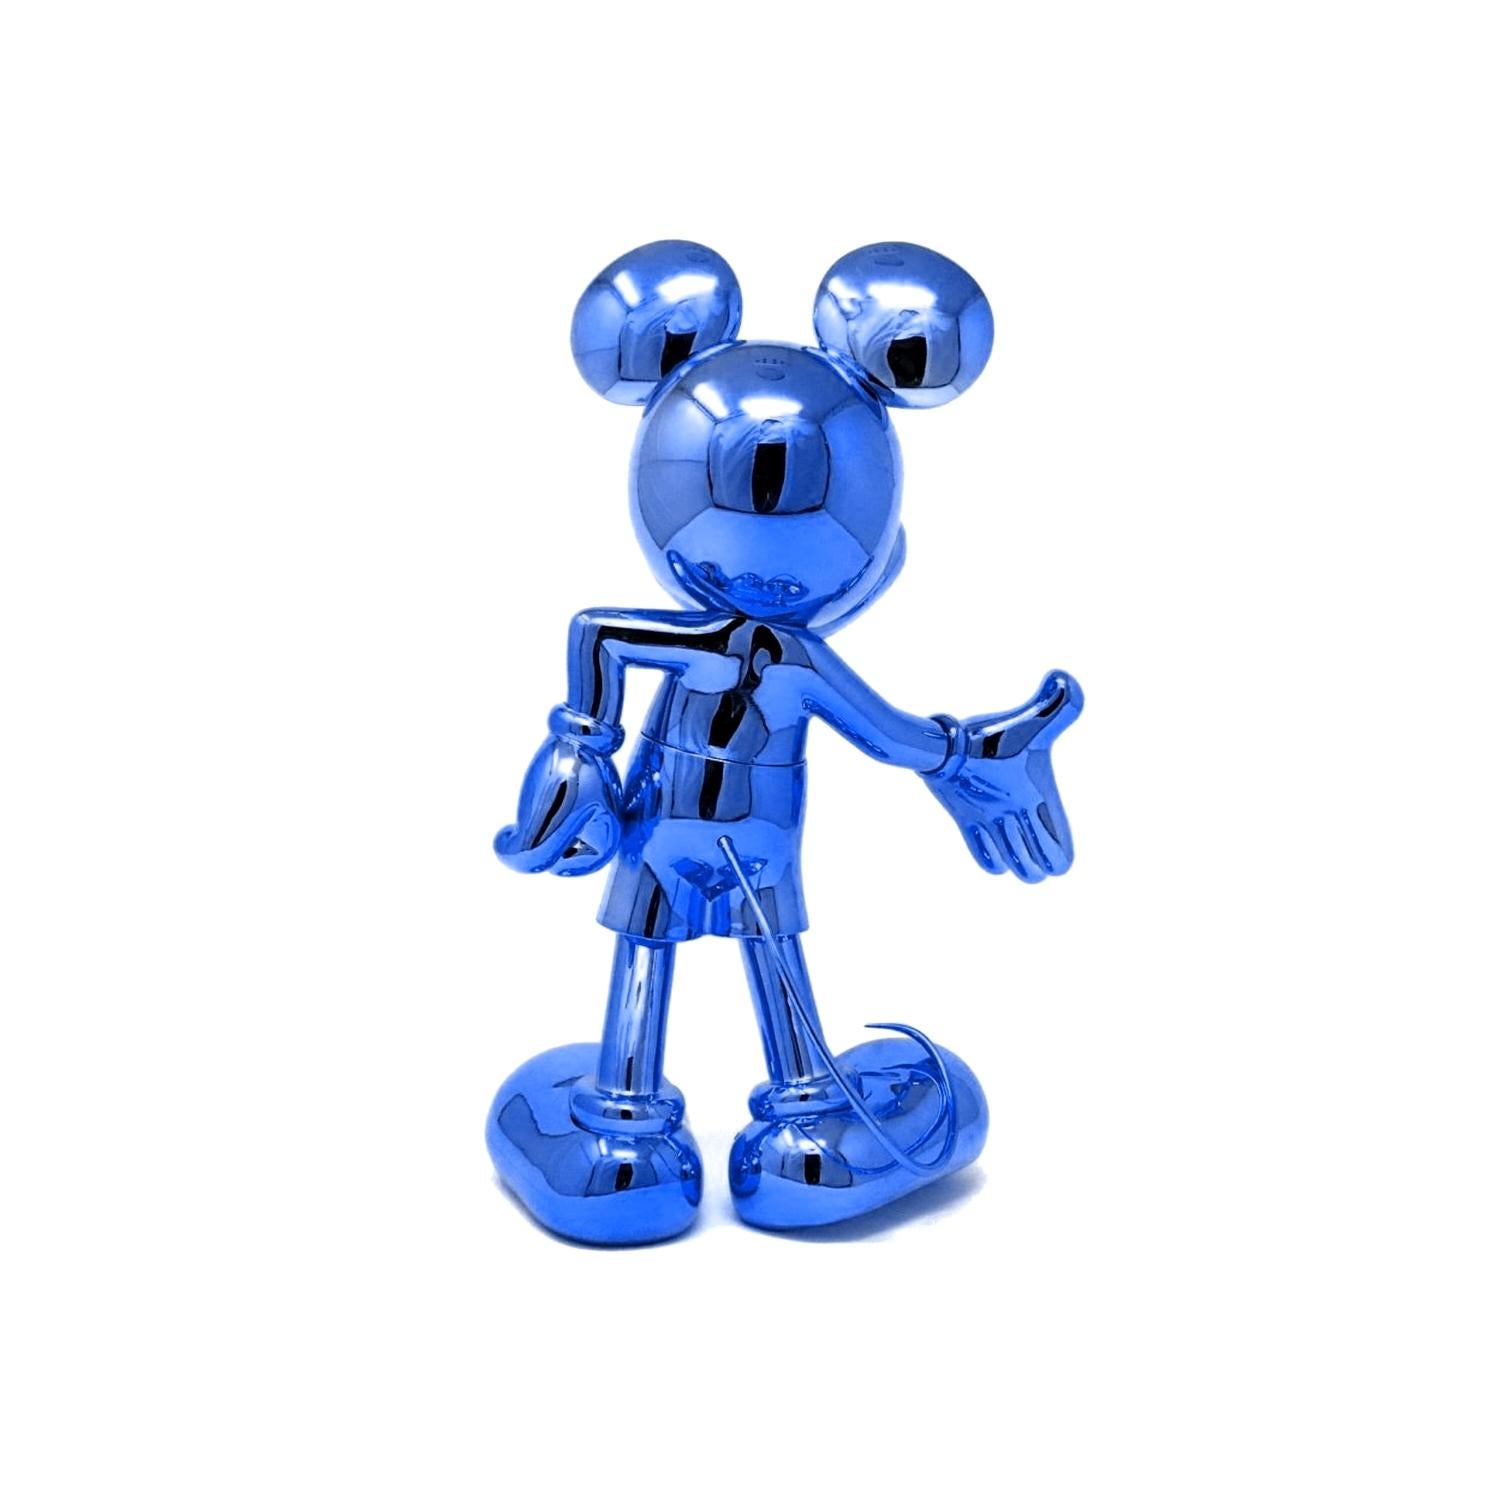 Contemporary In Stock in Los Angeles, Mickey Mouse Metallic Chrome Blue Pop Sculpture Figurine